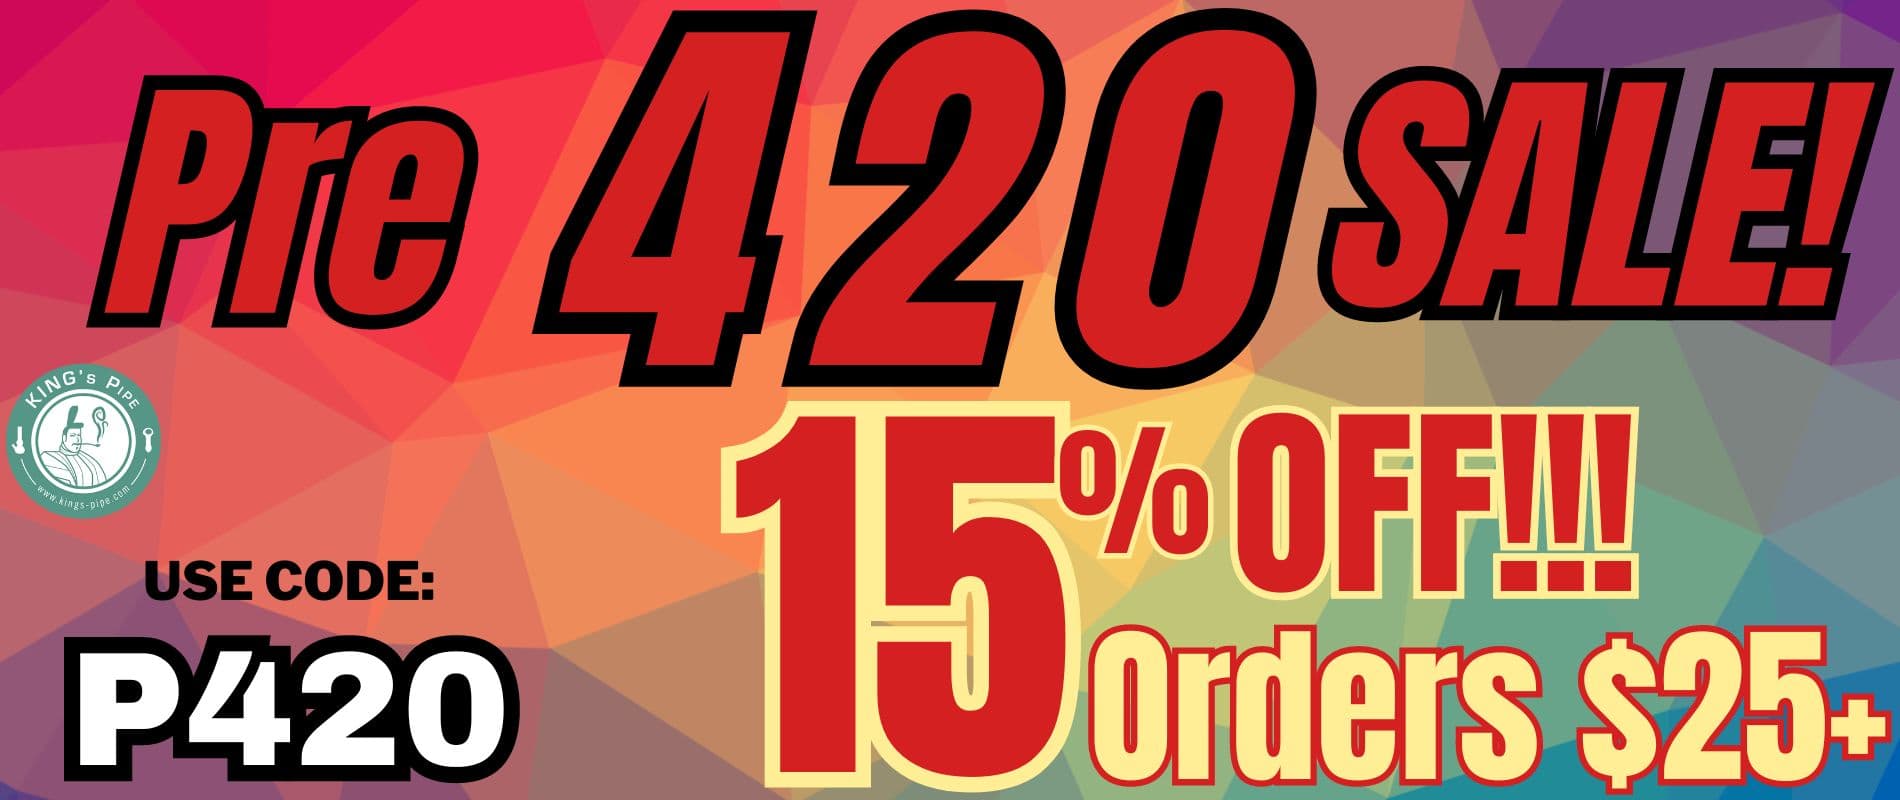 pre 420 sale on kings pipe online head shop for bongs and vapes